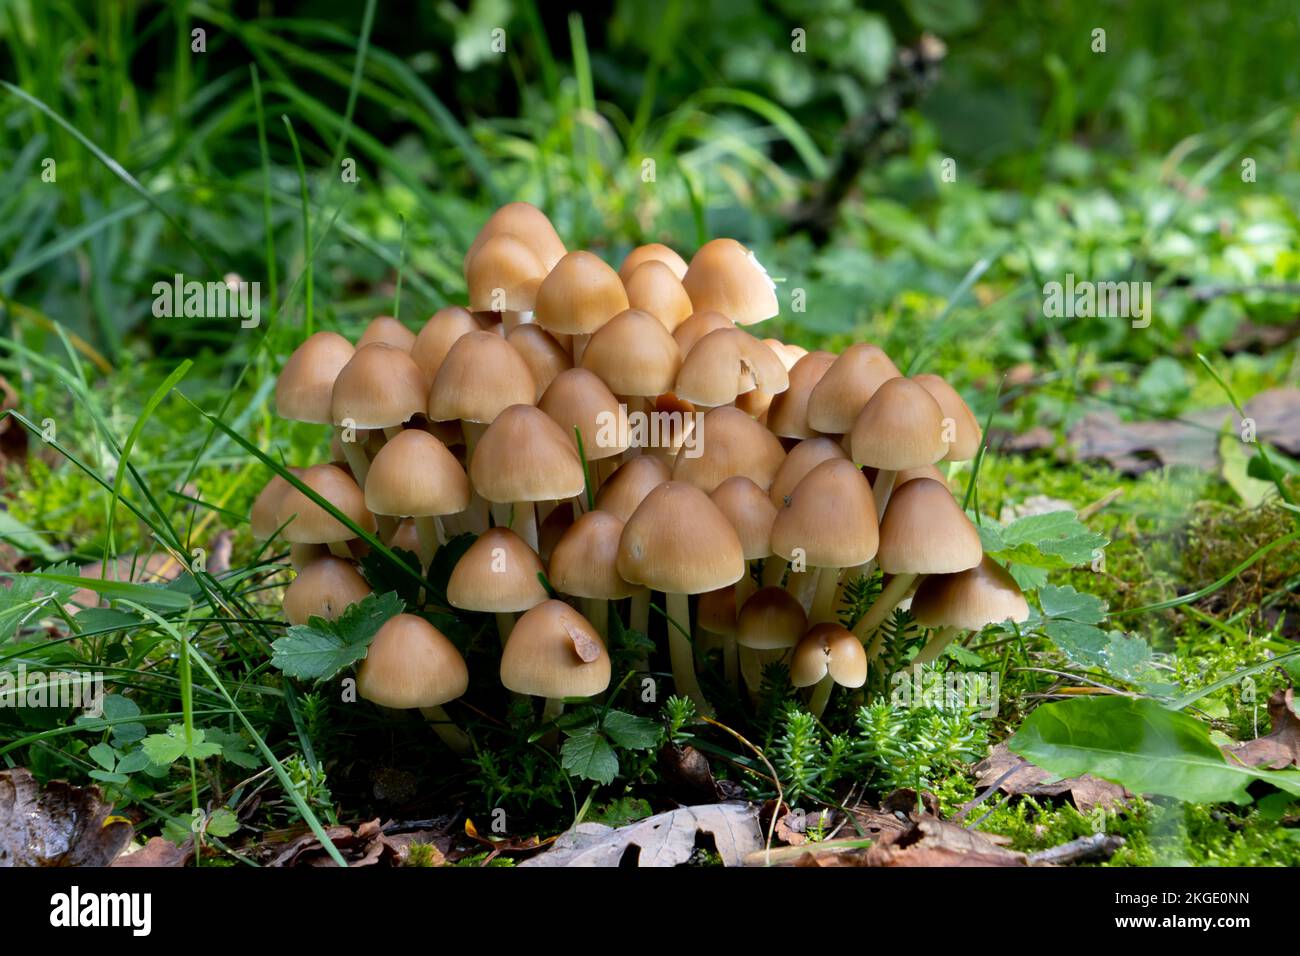 Cluster of many mycena inclinata mushrooms growing in the grass Stock Photo